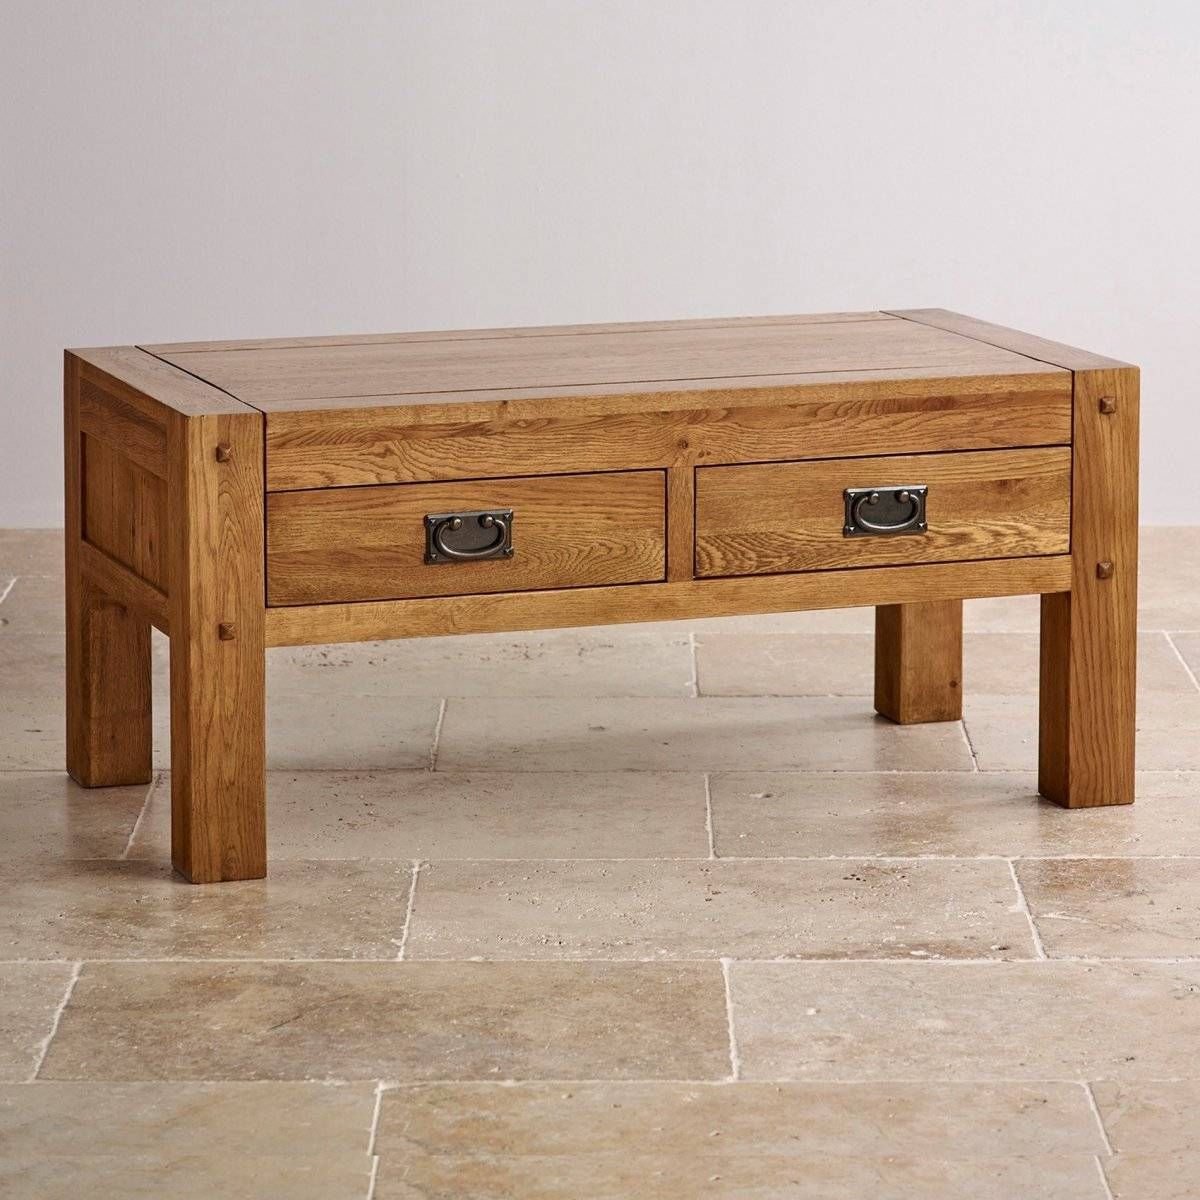 Quercus Coffee Table | Rustic Solid Oak | Oak Furniture Land Intended For Rustic Oak Coffee Table With Drawers (View 7 of 15)